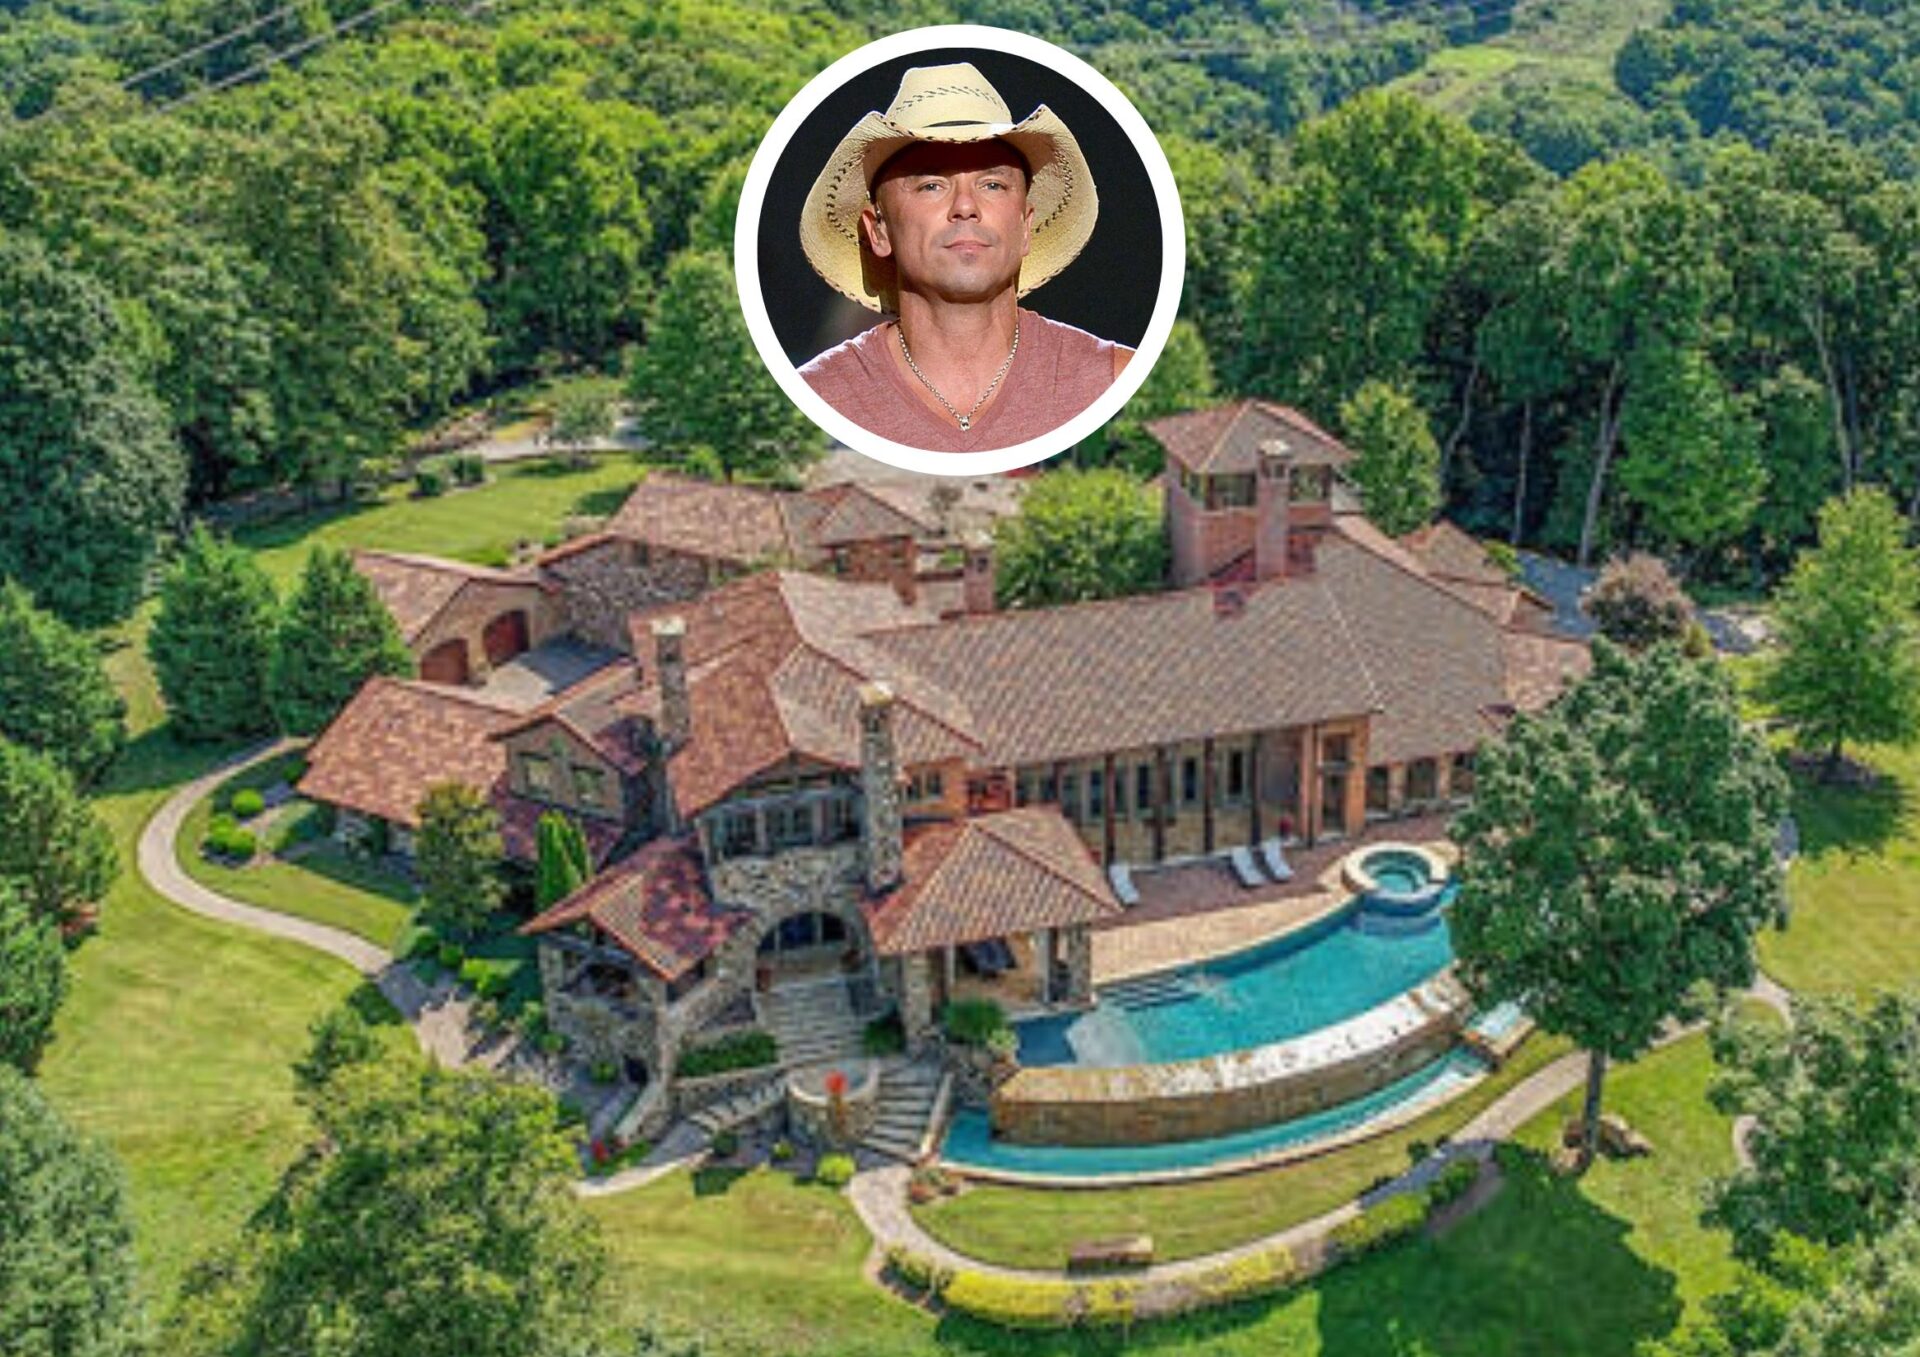 Main Image of Kenny Chesney's Tuscan Estate